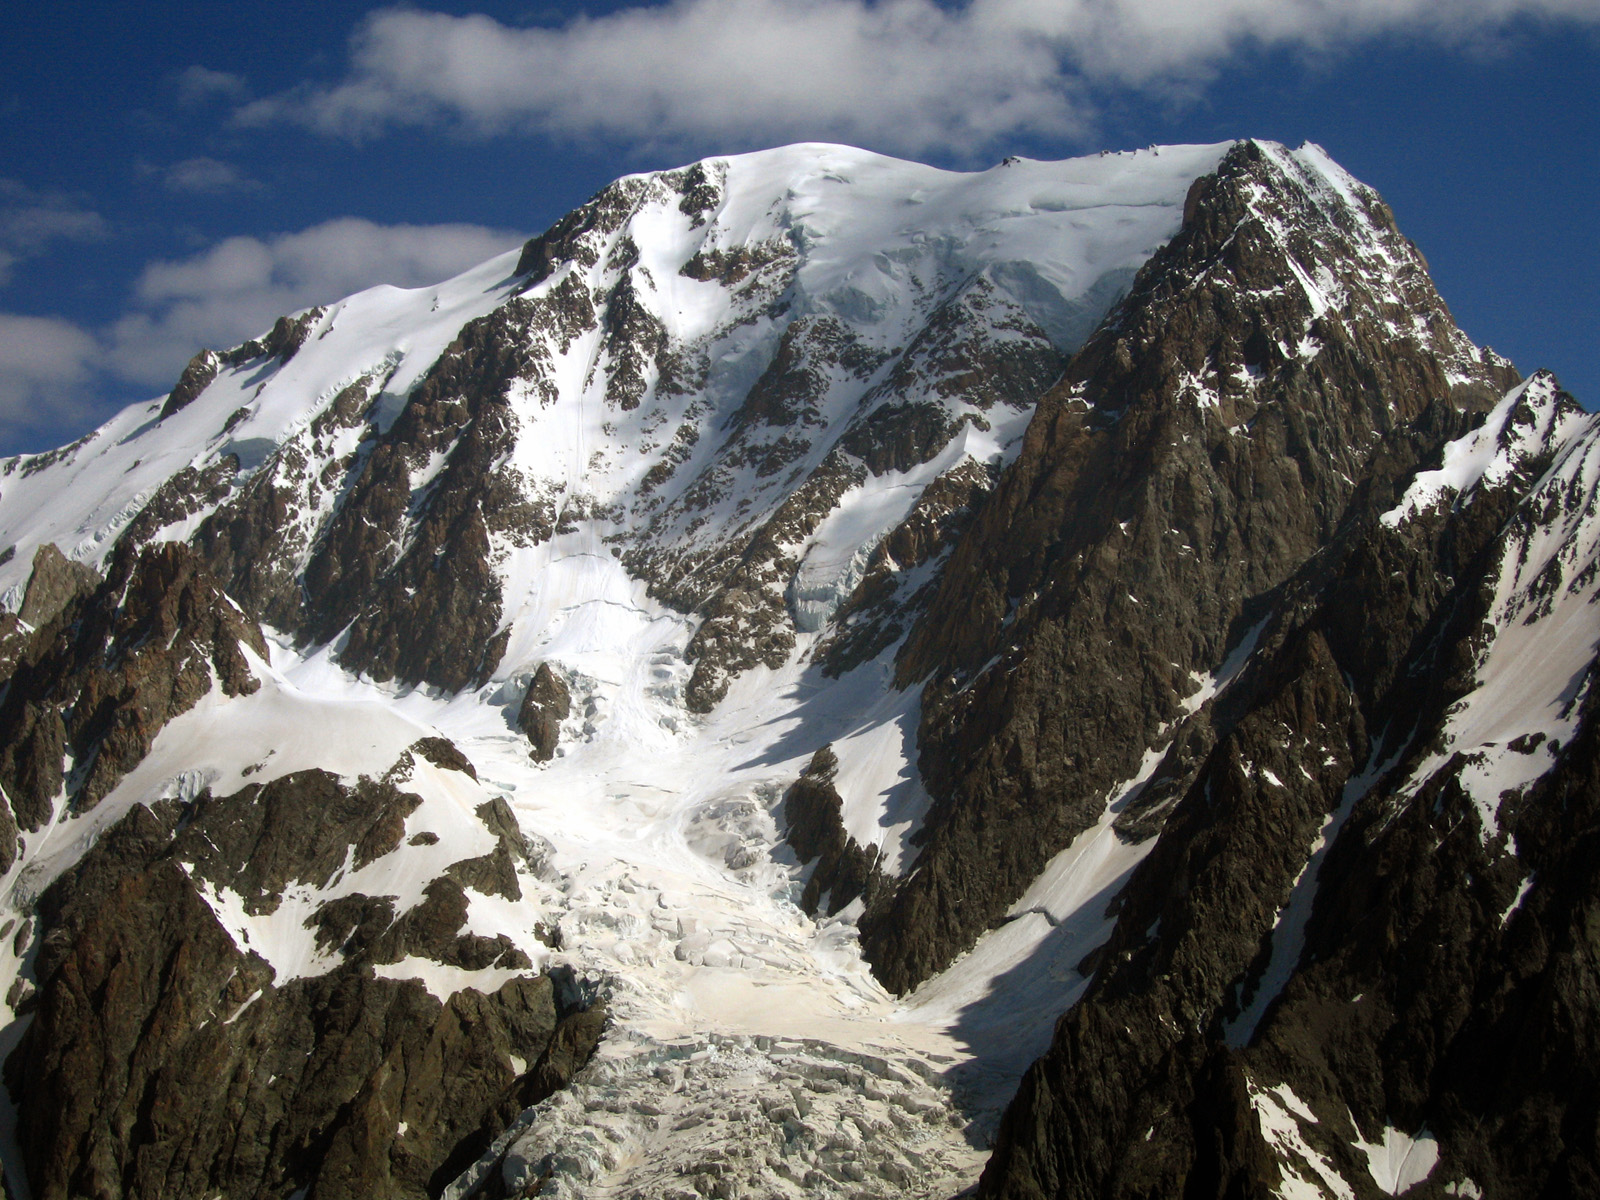 Mont Blanc, western face. The summit was most recently measured at 4,810.06meters. 18 meters of snow and ice cover the actual rock peak, at 4,792 meters.